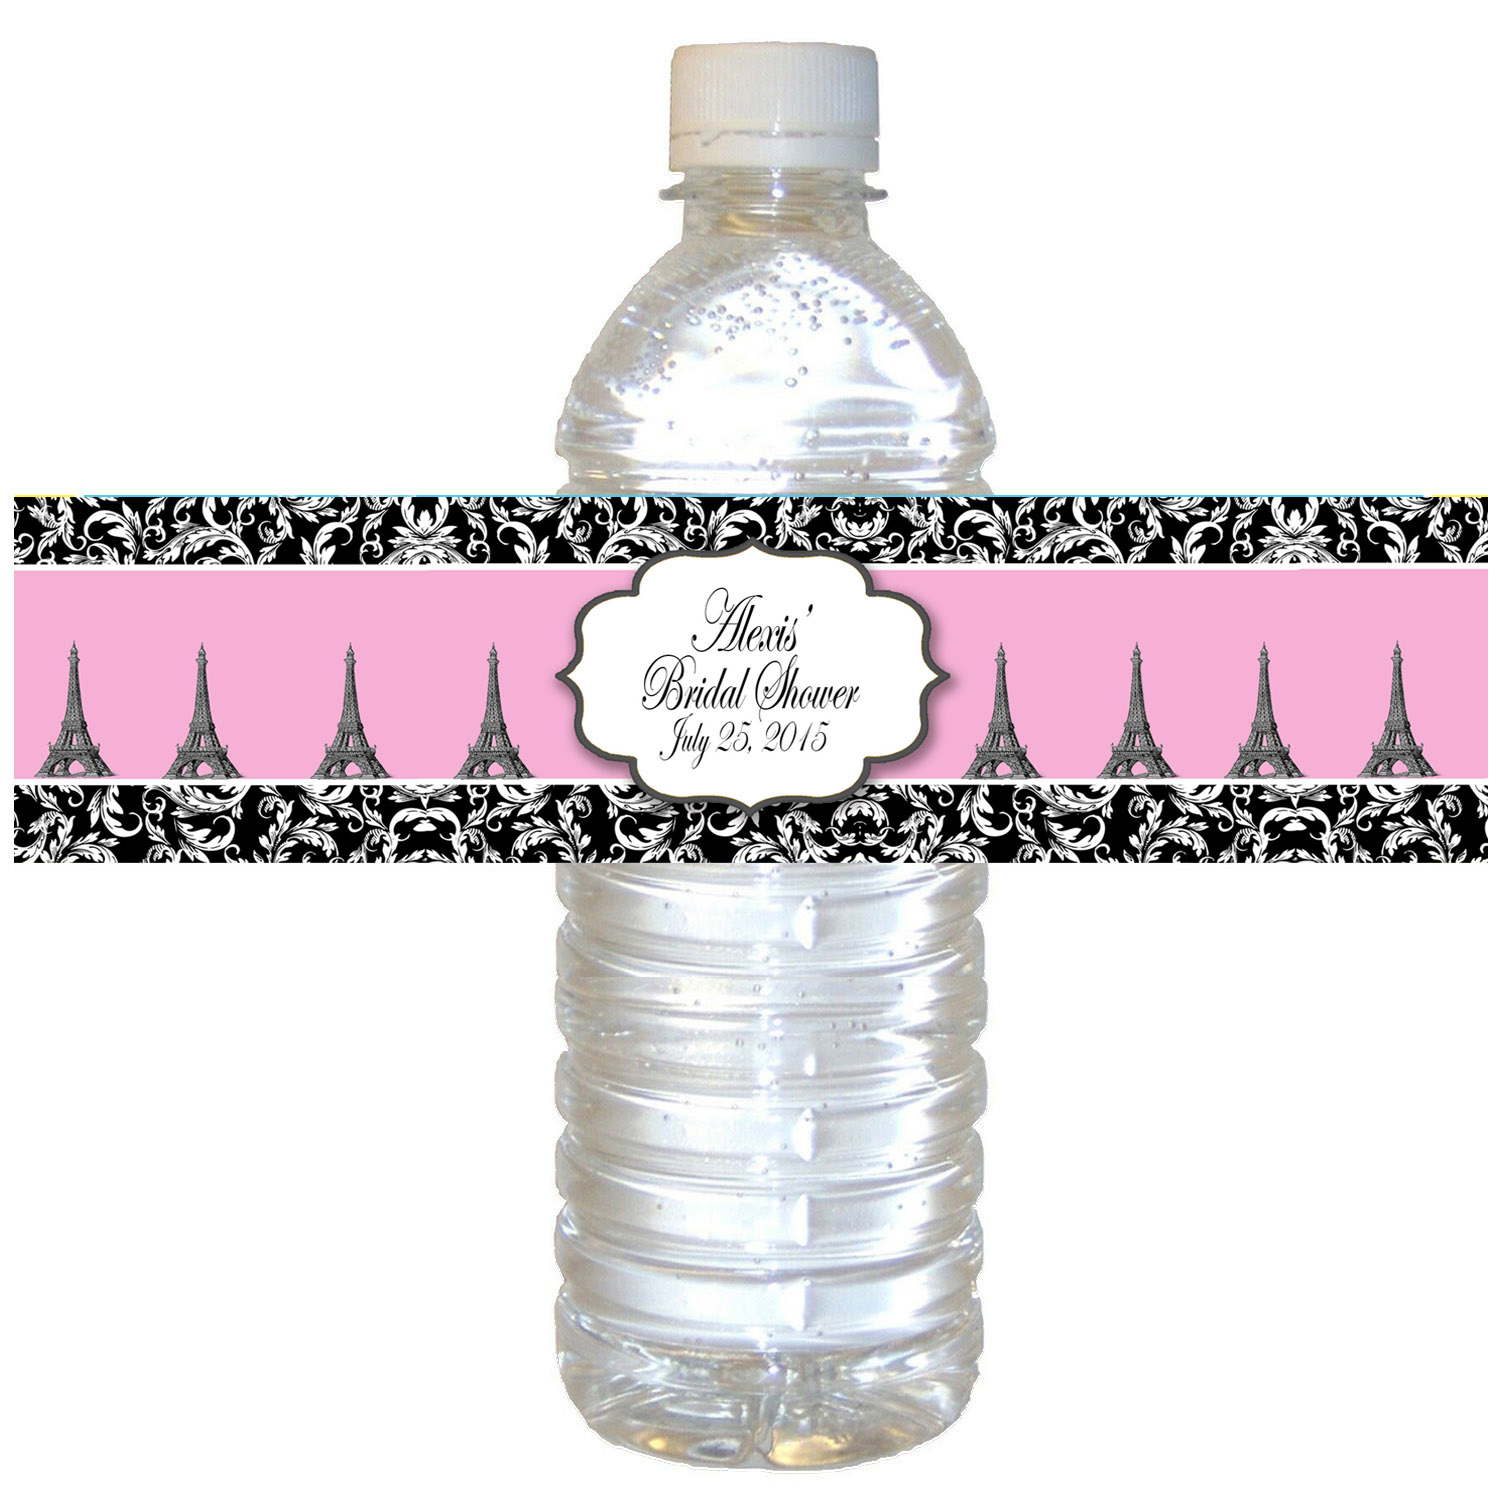 How to Make Custom Water Bottle Labels - Pretty Party & Crafty